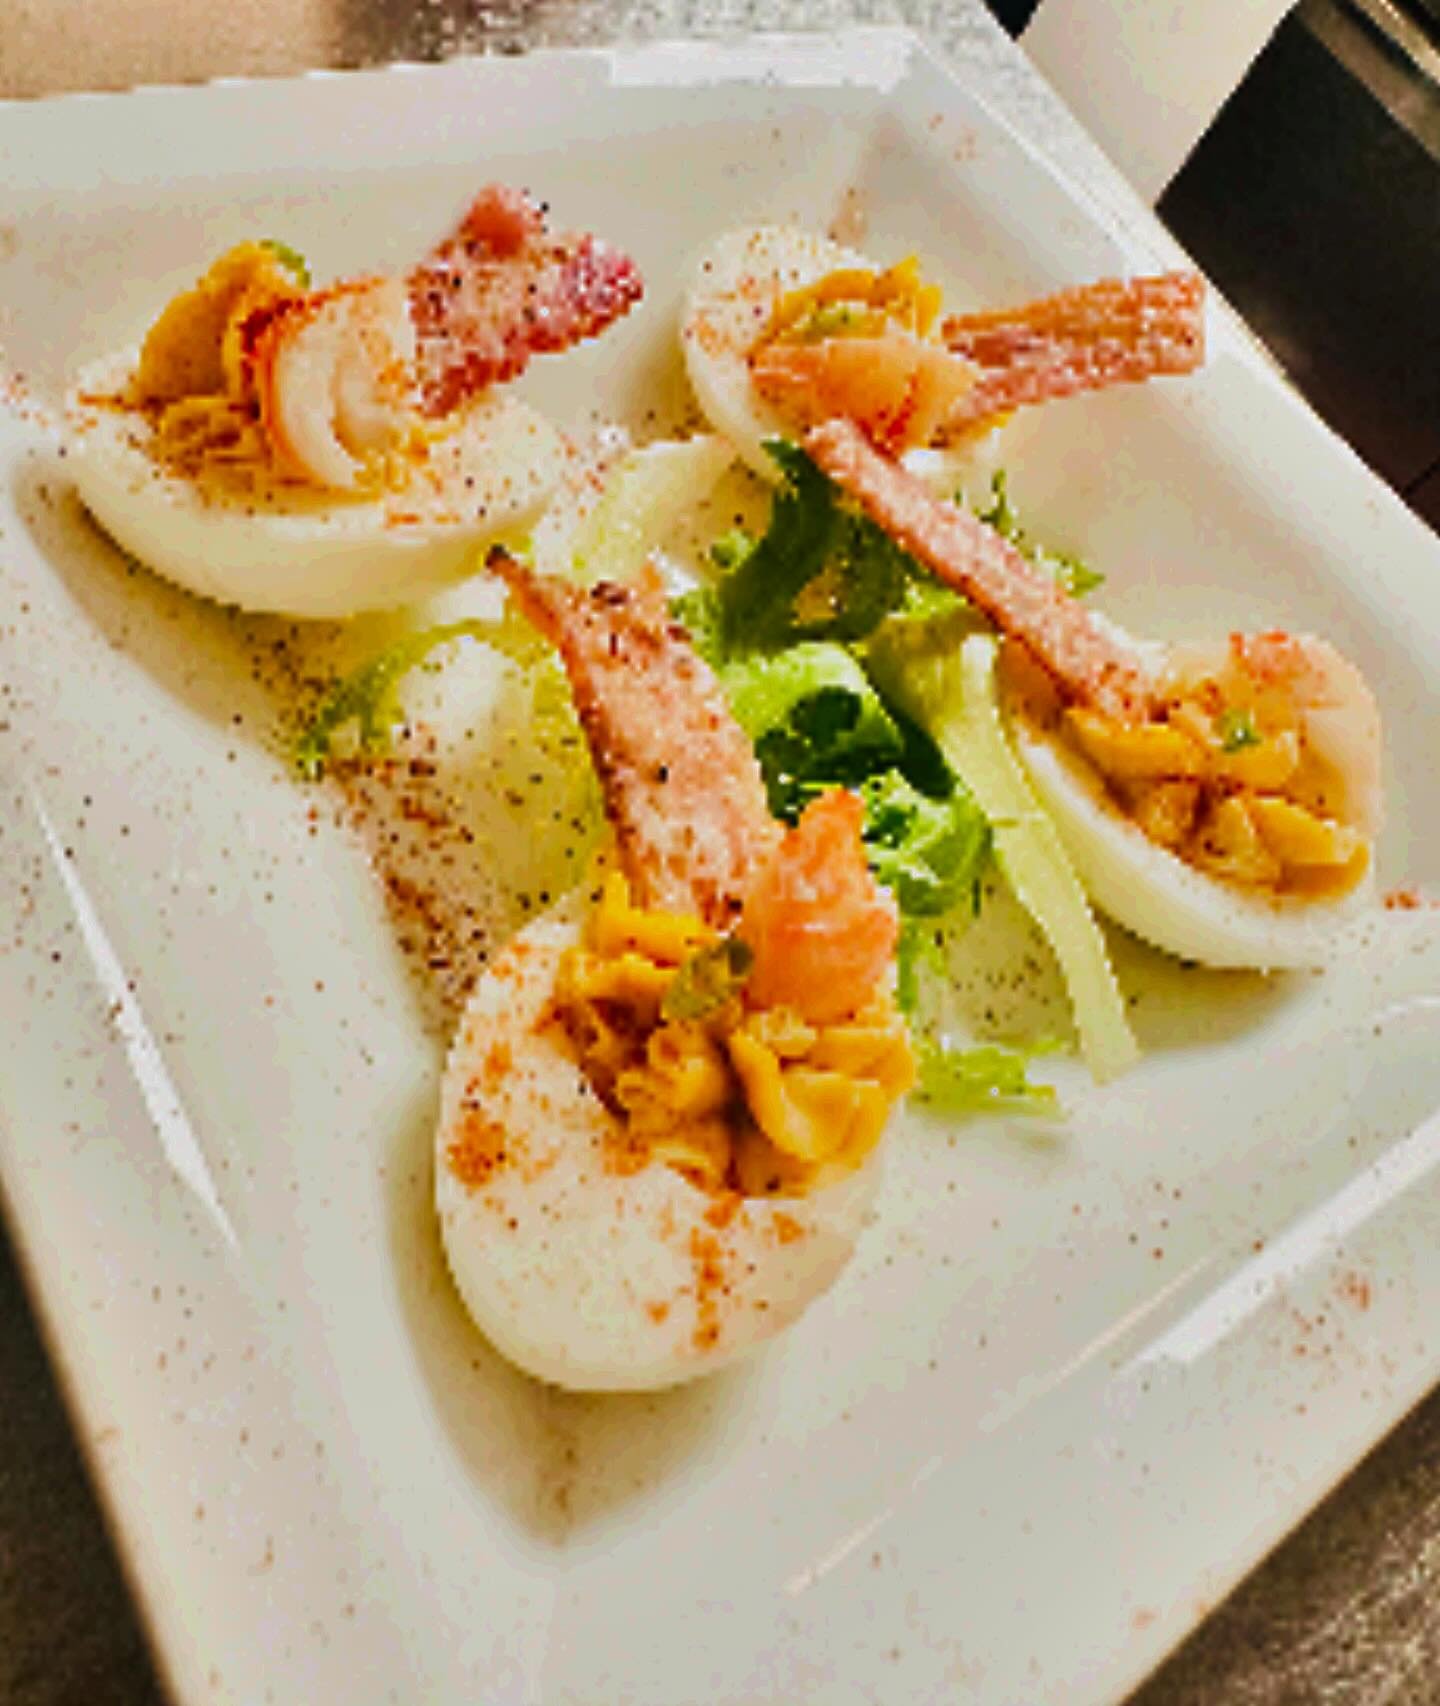 One of our most popular starters on the menu are our Deviled Eggs. Eggs, Lobster, Candied Bacon, Chives and Old Bay.